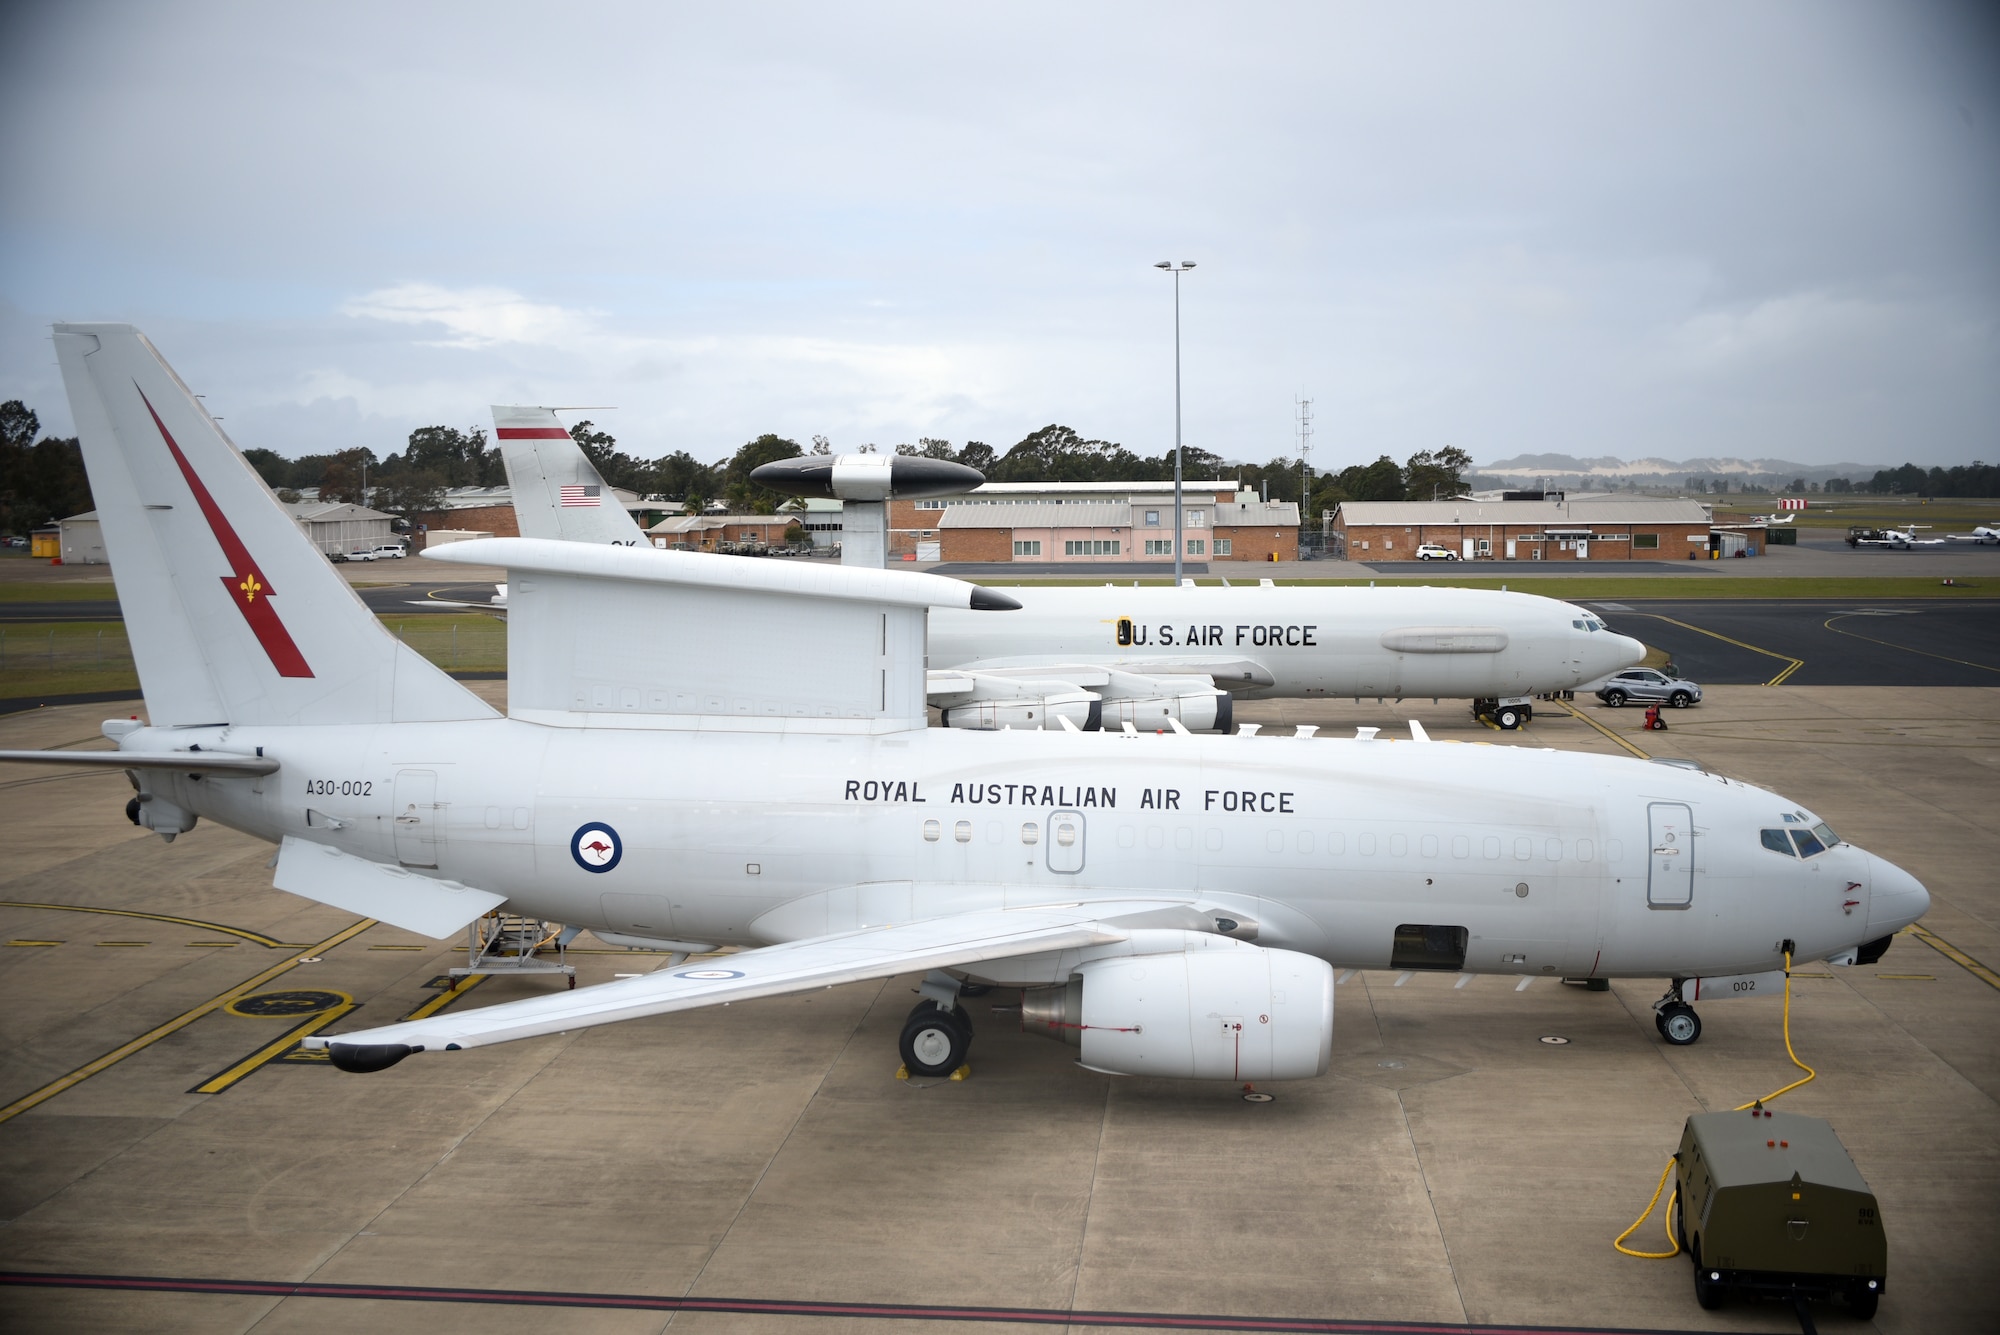 Despite similar missions, the radar differences become more obvious as the E-3 Sentry Airborne Warning and Control System joins the E-7 Wedgetail Airborne Warning Early Control aircraft at Royal Australian Air Force Base Williamtown in September 2019. This visit allowed for joint-mission flying sorties and integration among allies and similar platforms. (U.S. Air Force photo /2nd Lt. Ashlyn K. Paulson)